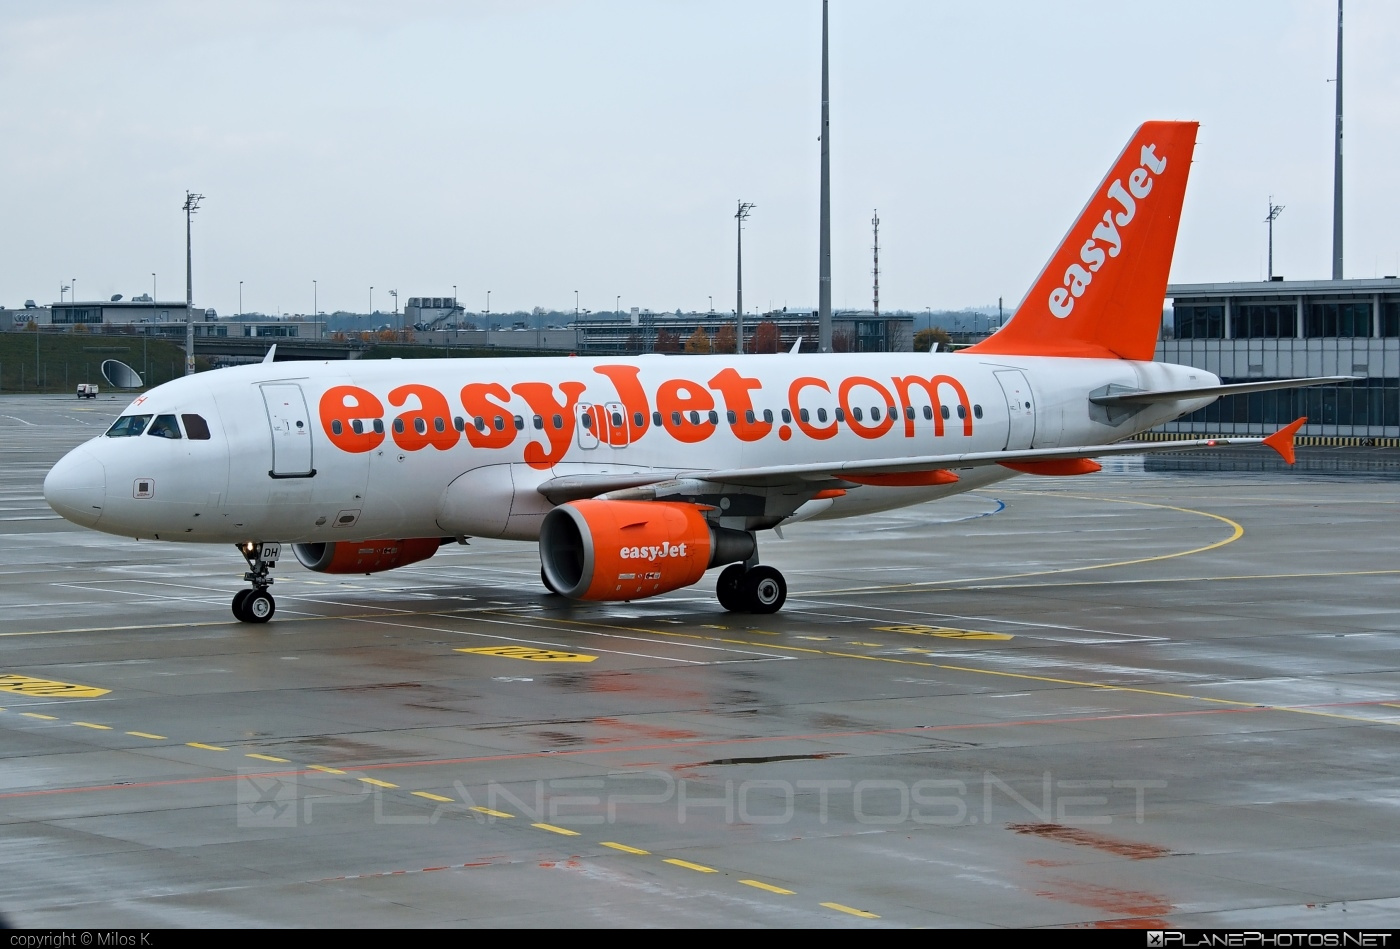 Airbus A319-111 - G-EZDH operated by easyJet #a319 #a320family #airbus #airbus319 #easyjet